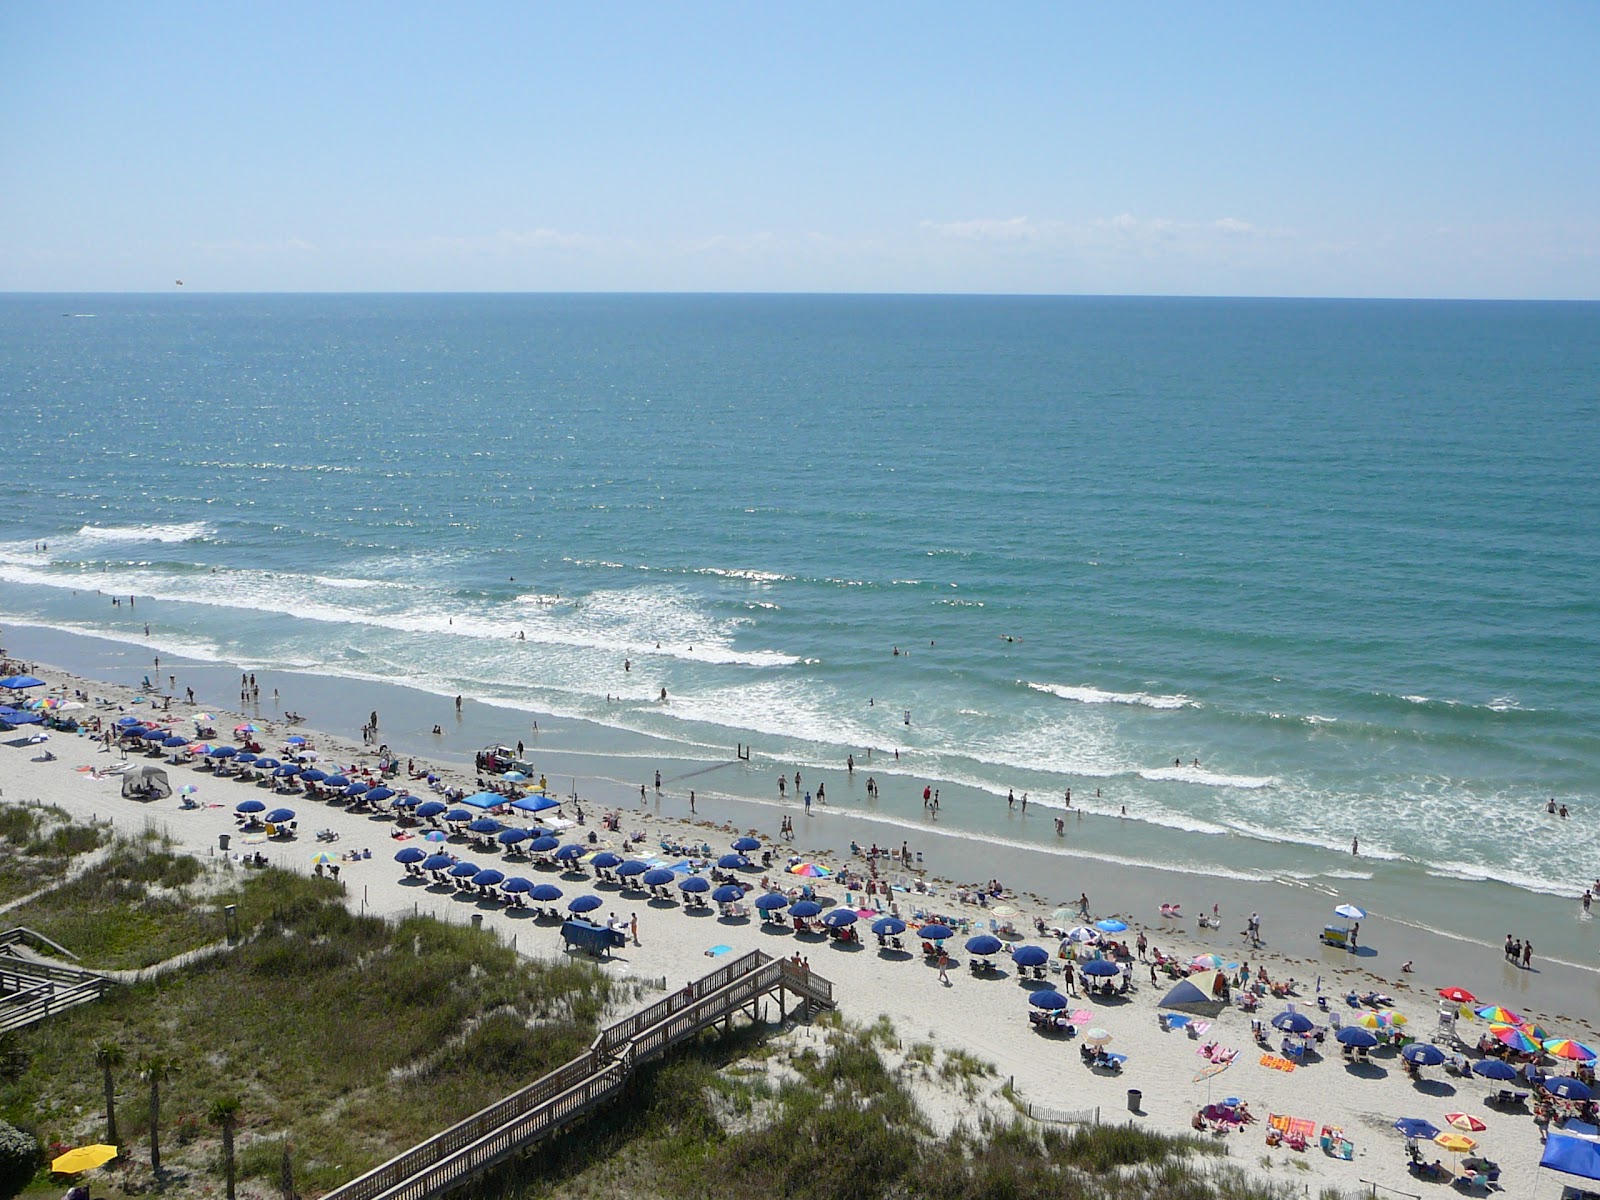 Myrtle beach area beaches test safe for swimming; social 